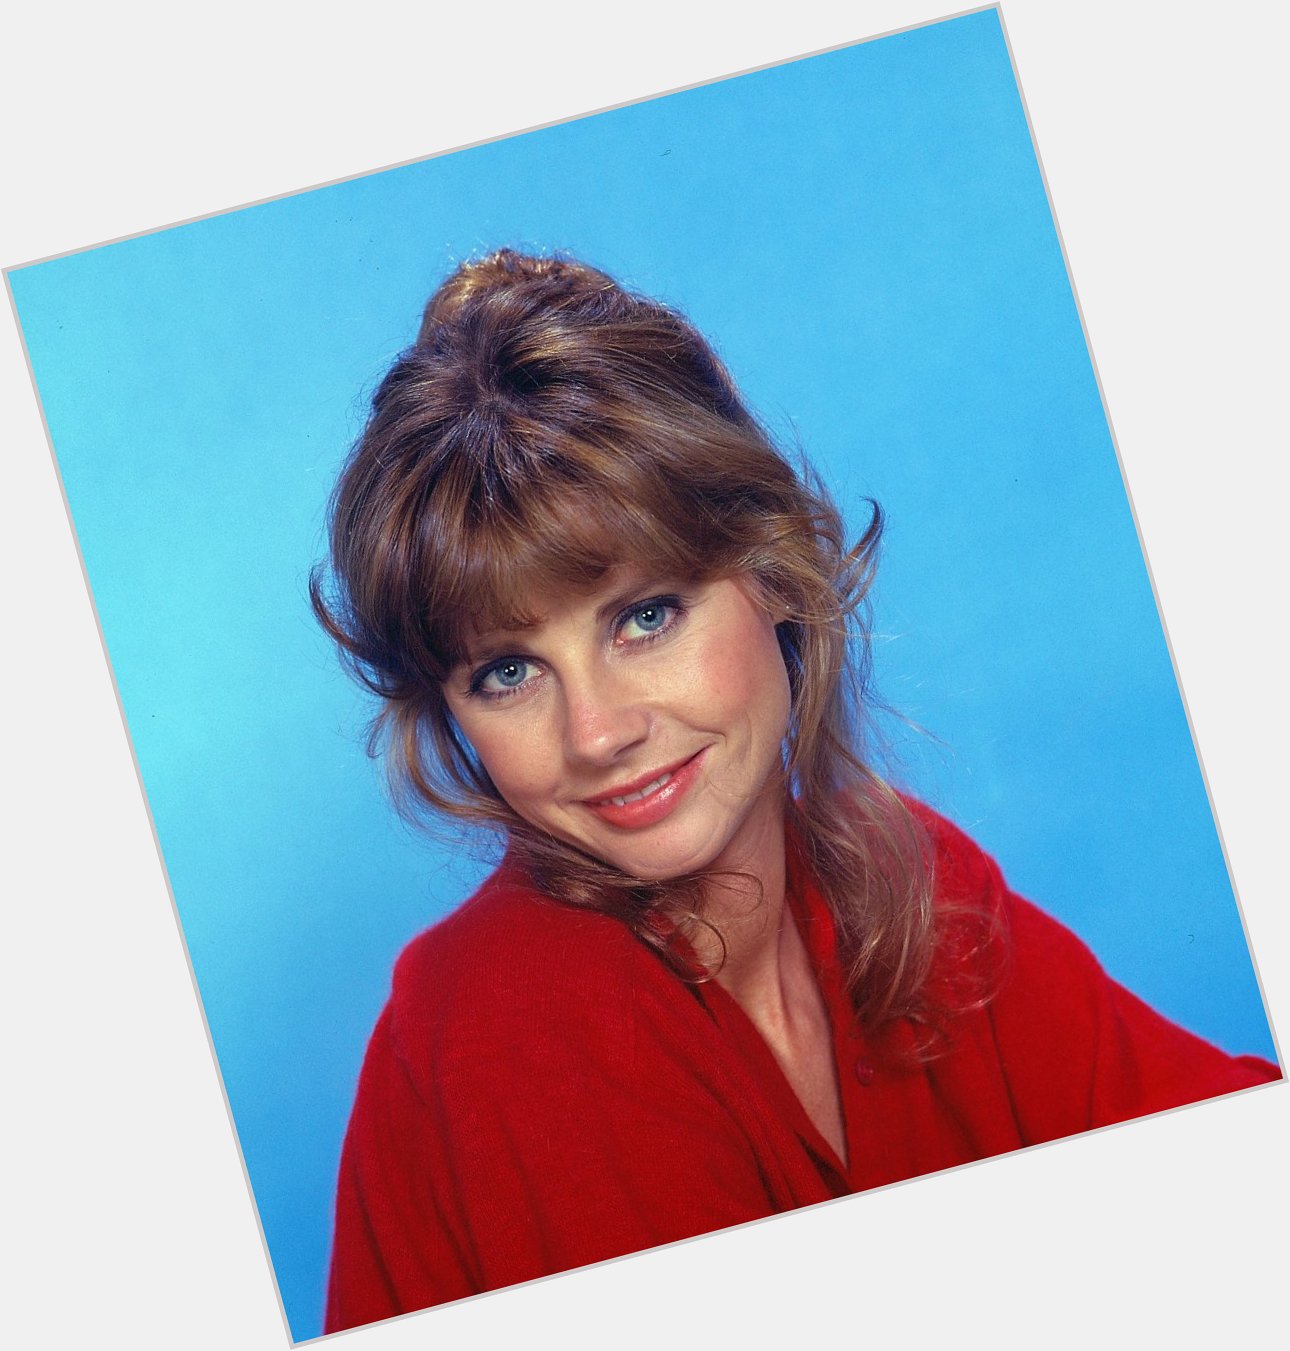 Blowing out some birthday candles today. Happy Birthday JAN SMITHERS 